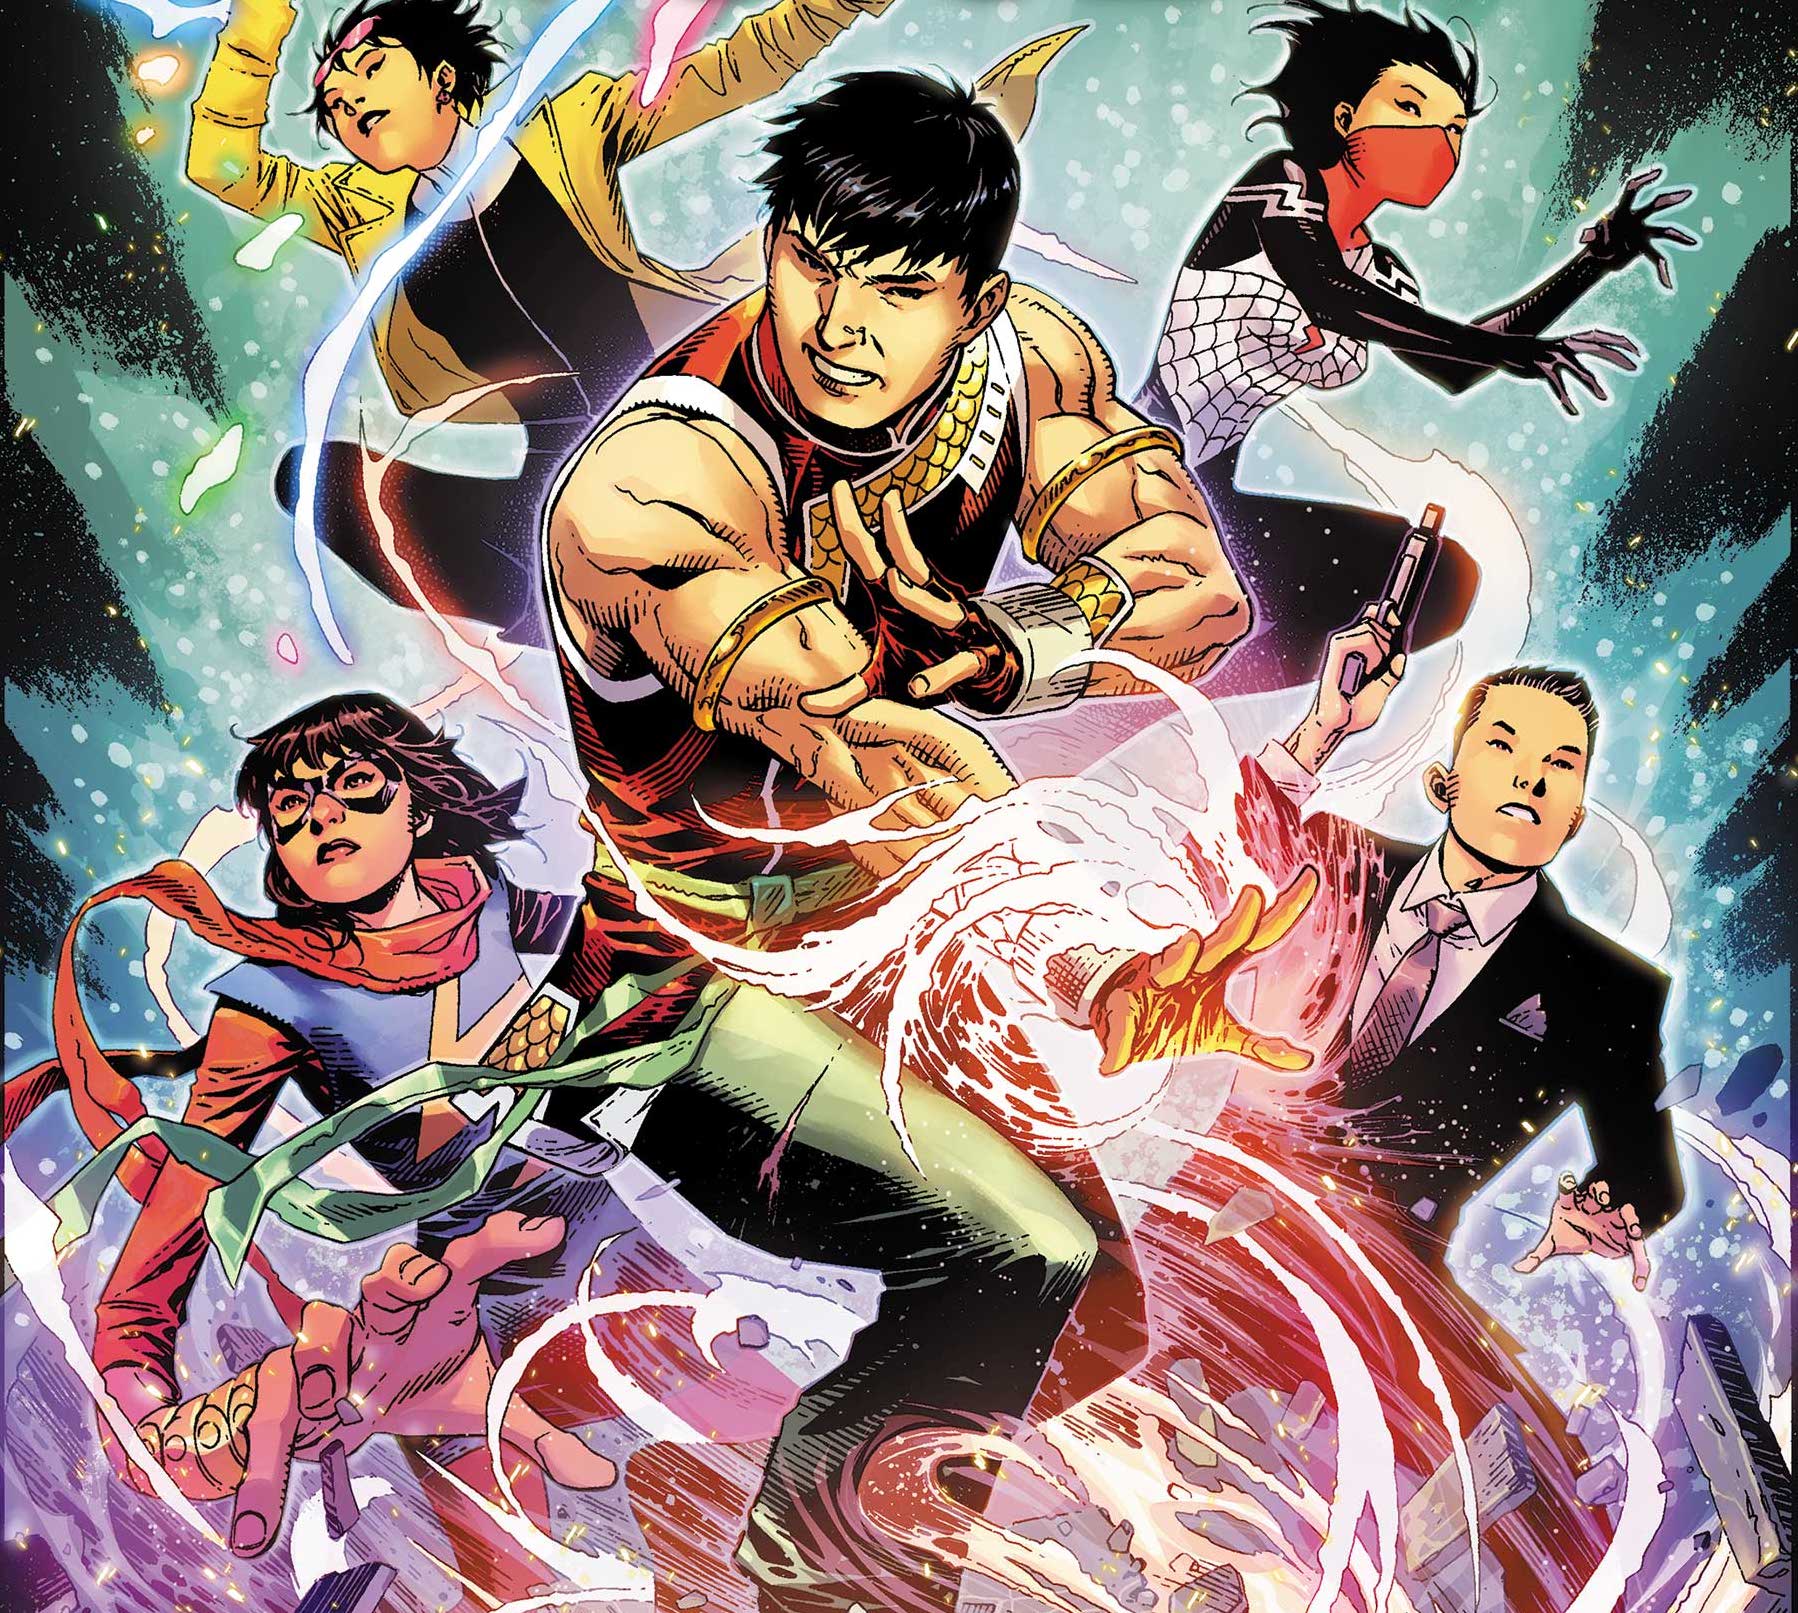 Marvel celebrates Asian Pacific American Heritage Month with 'Marvel's Voices: Identity'